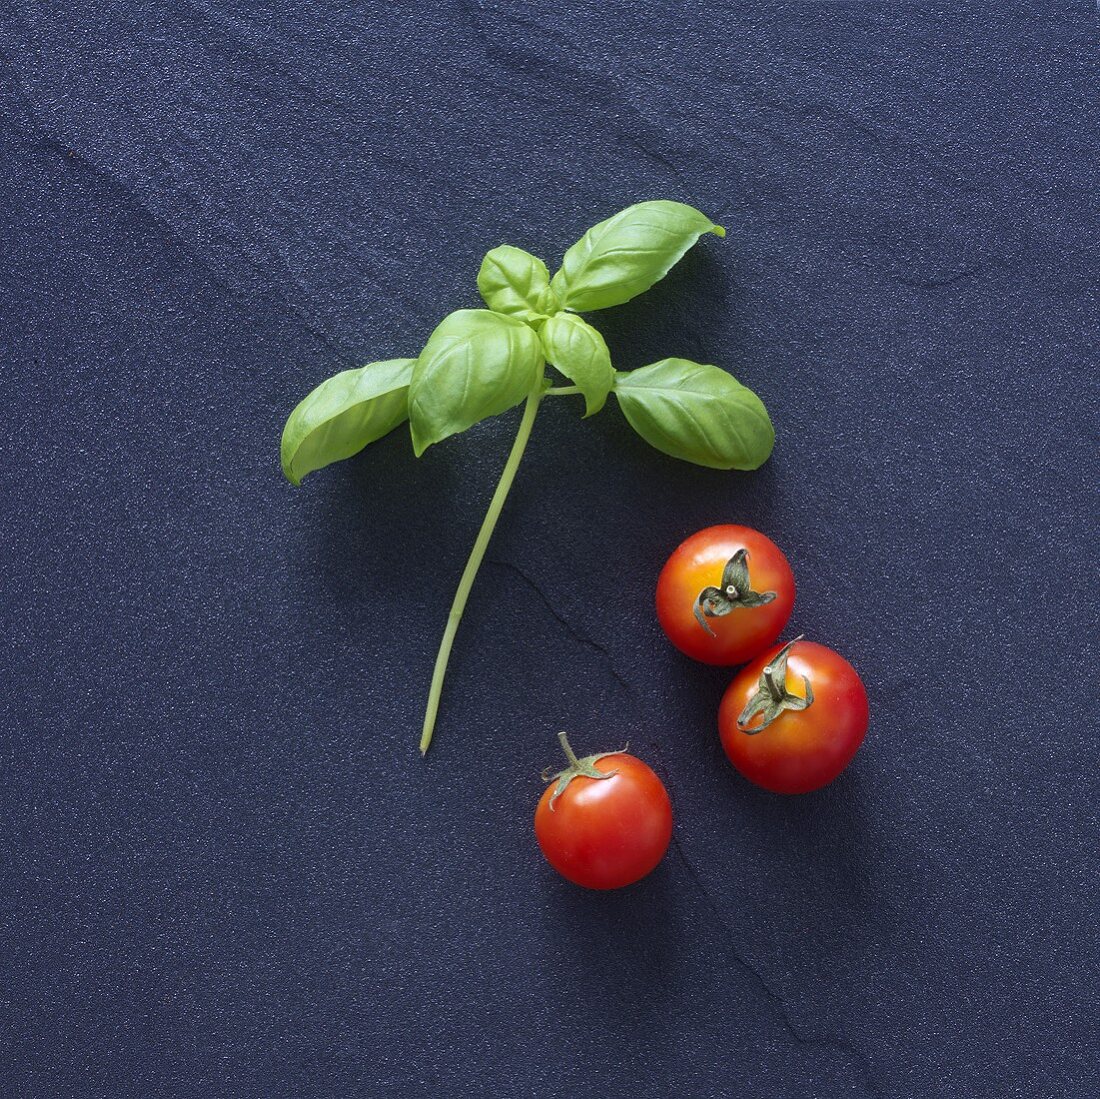 Sprig of basil and cherry tomatoes